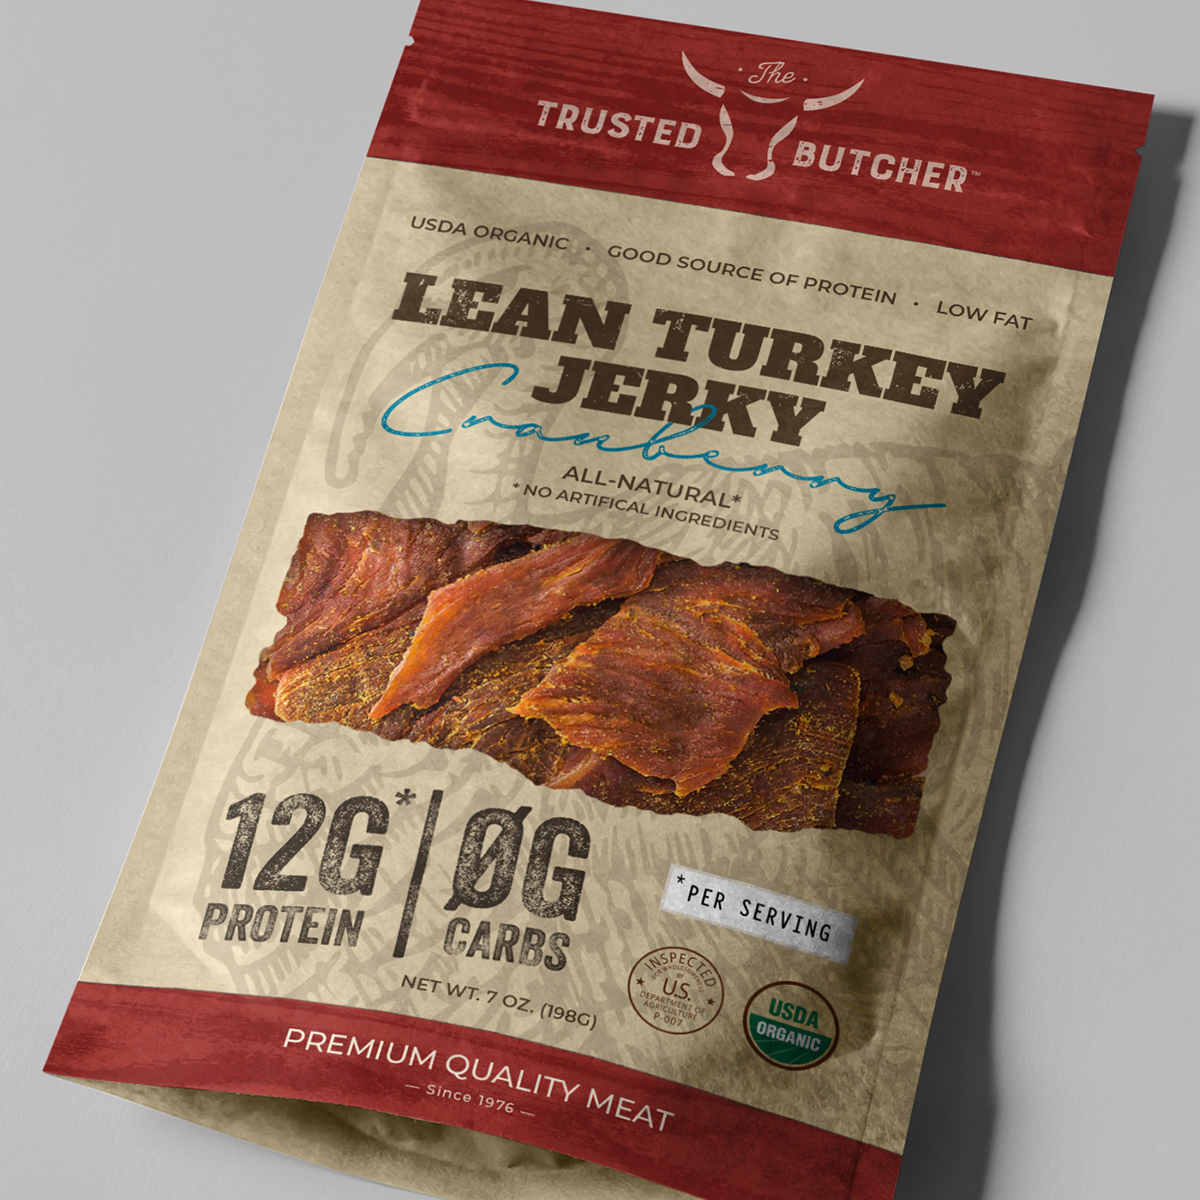 The Trusted Butcher Jerky Packaging Design